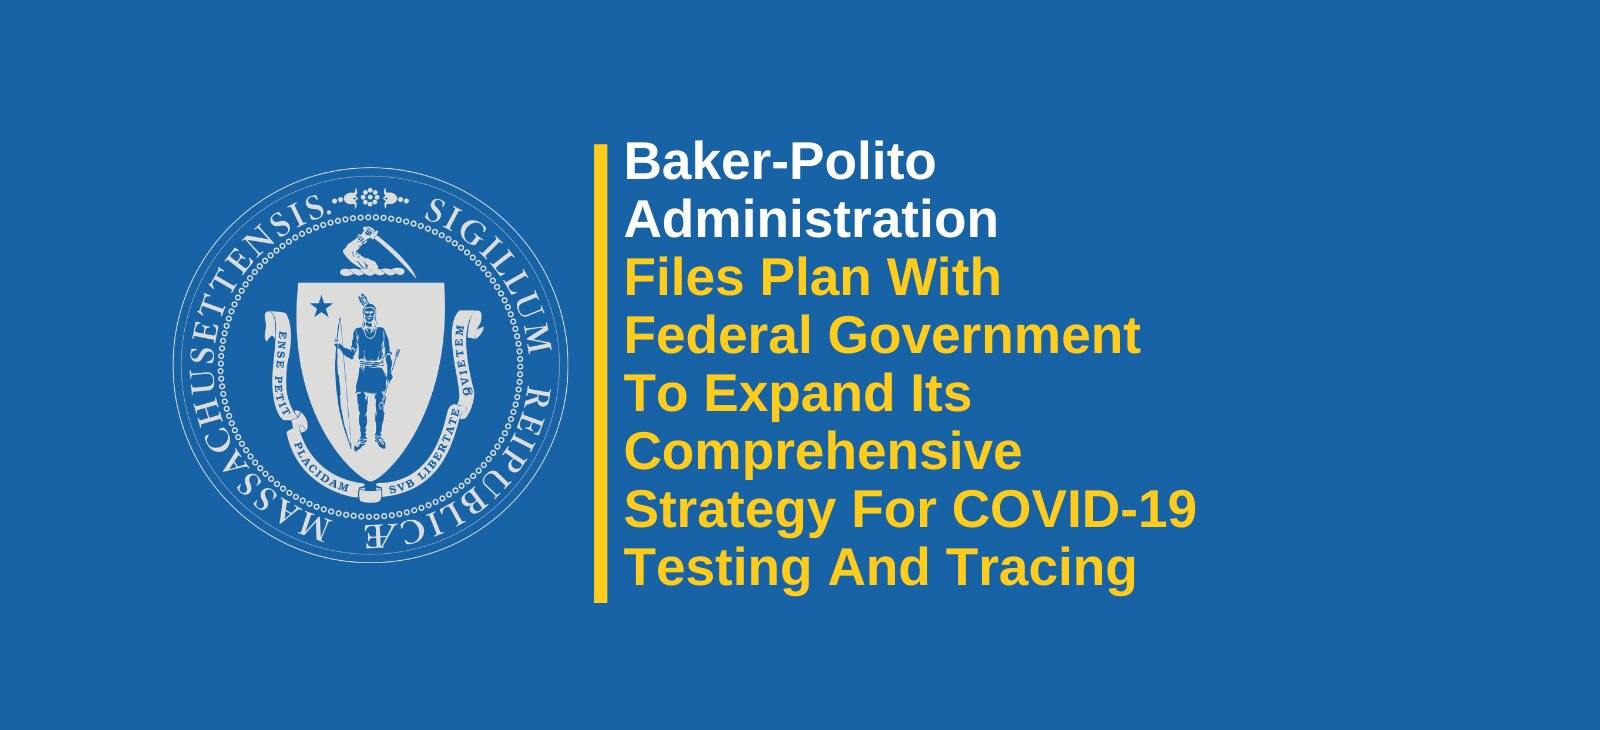 Baker-Polito Administration’s COVID-19 Command Center Files Plan With Federal Government To Expand Its Comprehensive Strategy For COVID-19 Testing And Tracing